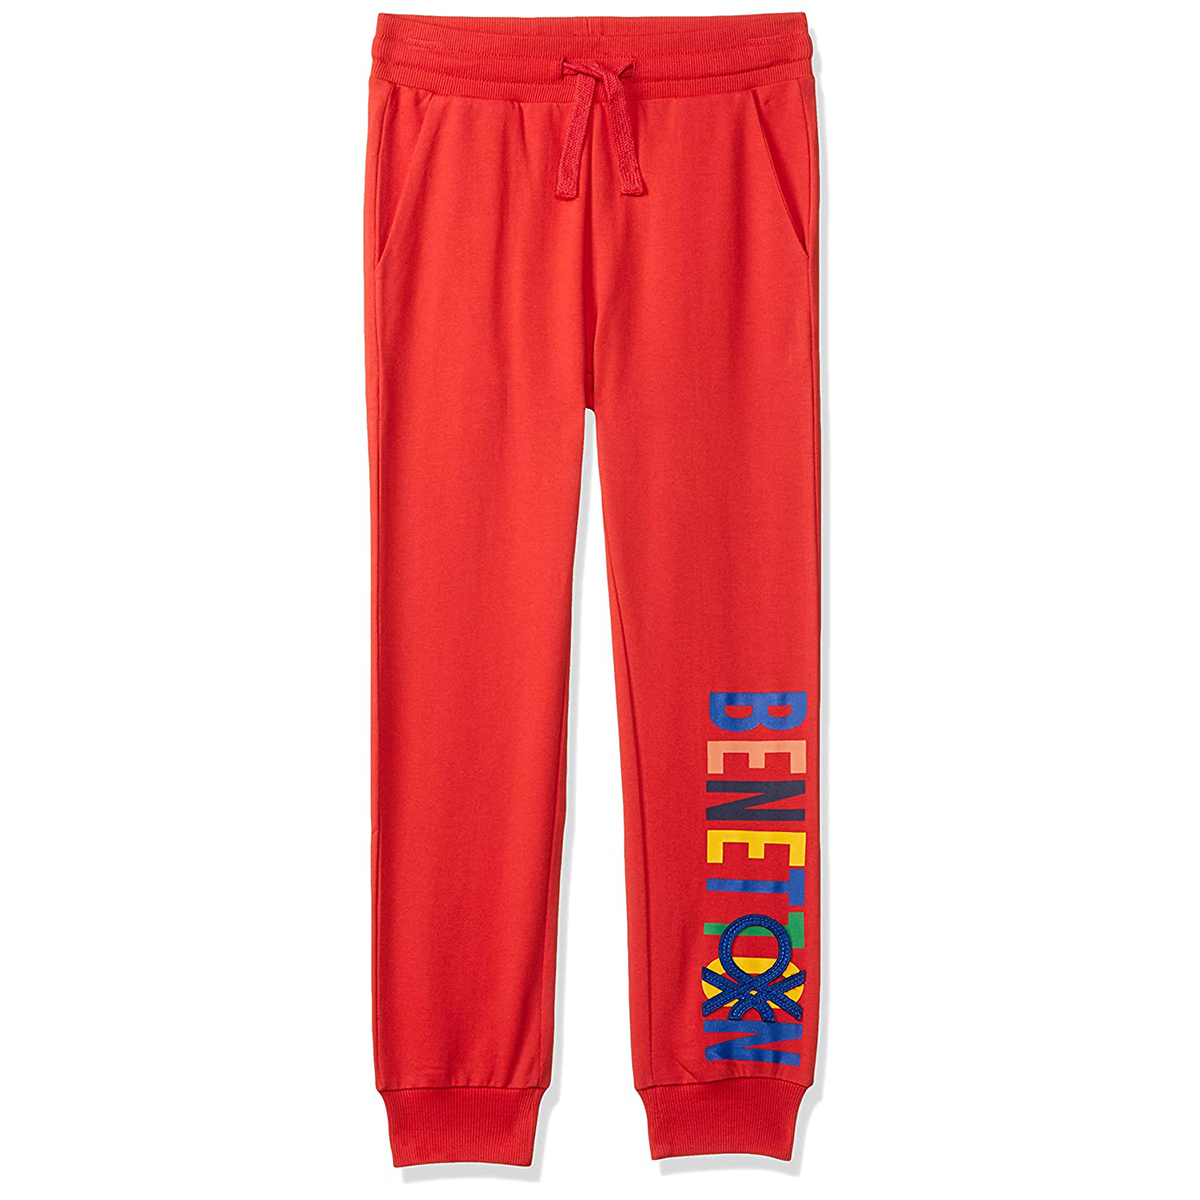 United Colors of Benetton Boy's Regular Fit Track Pants- Red